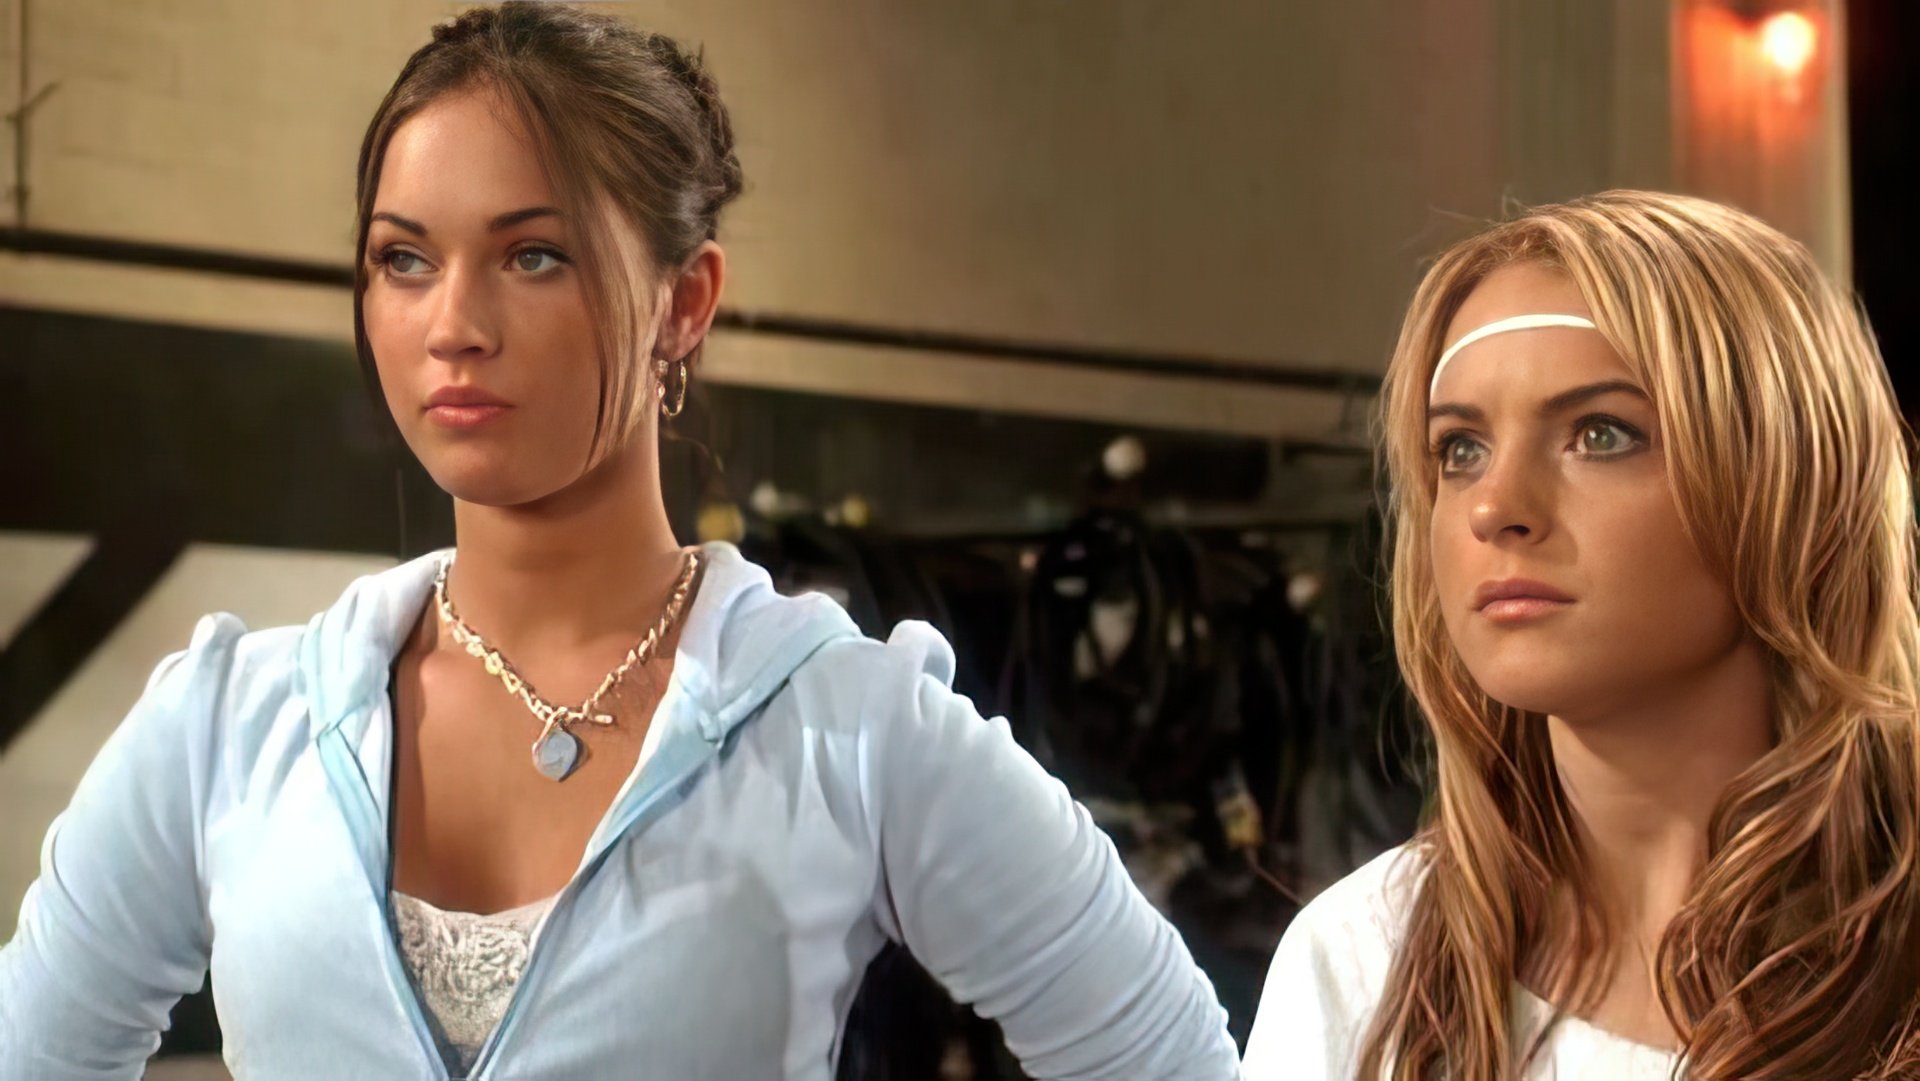 Lindsay Lohan and Megan Fox starred in one movie